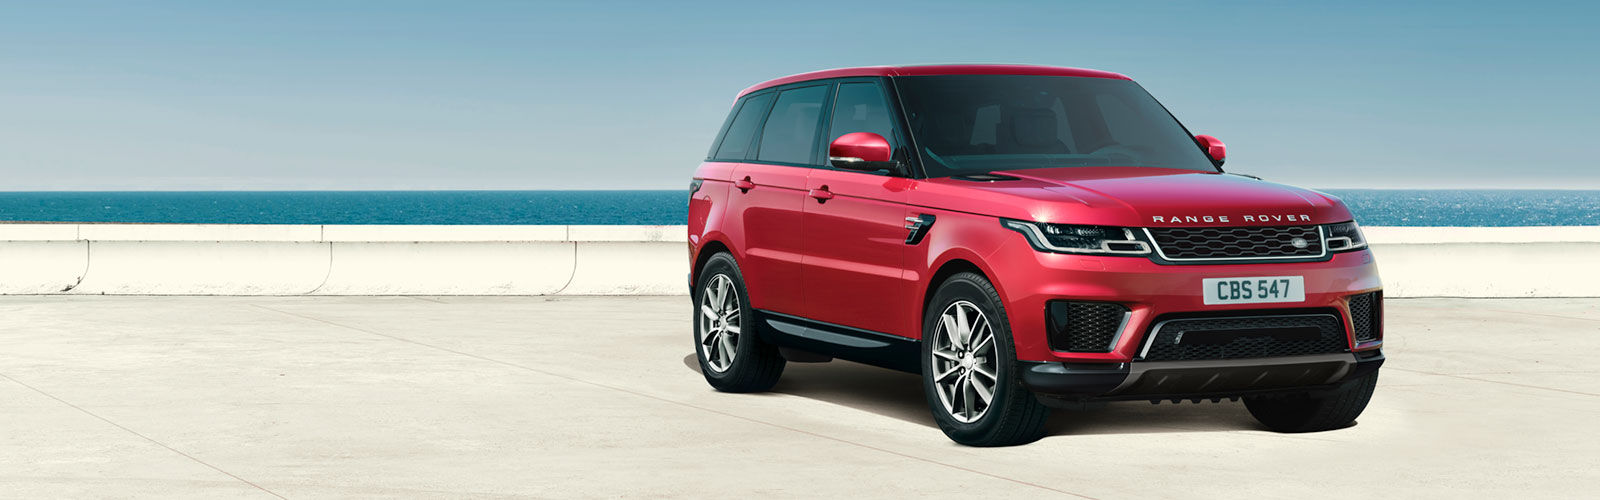 Range Rover Hse Price Dubai  . Search New & Used Land Rover Range Rover Hse For Sale In Your Area.